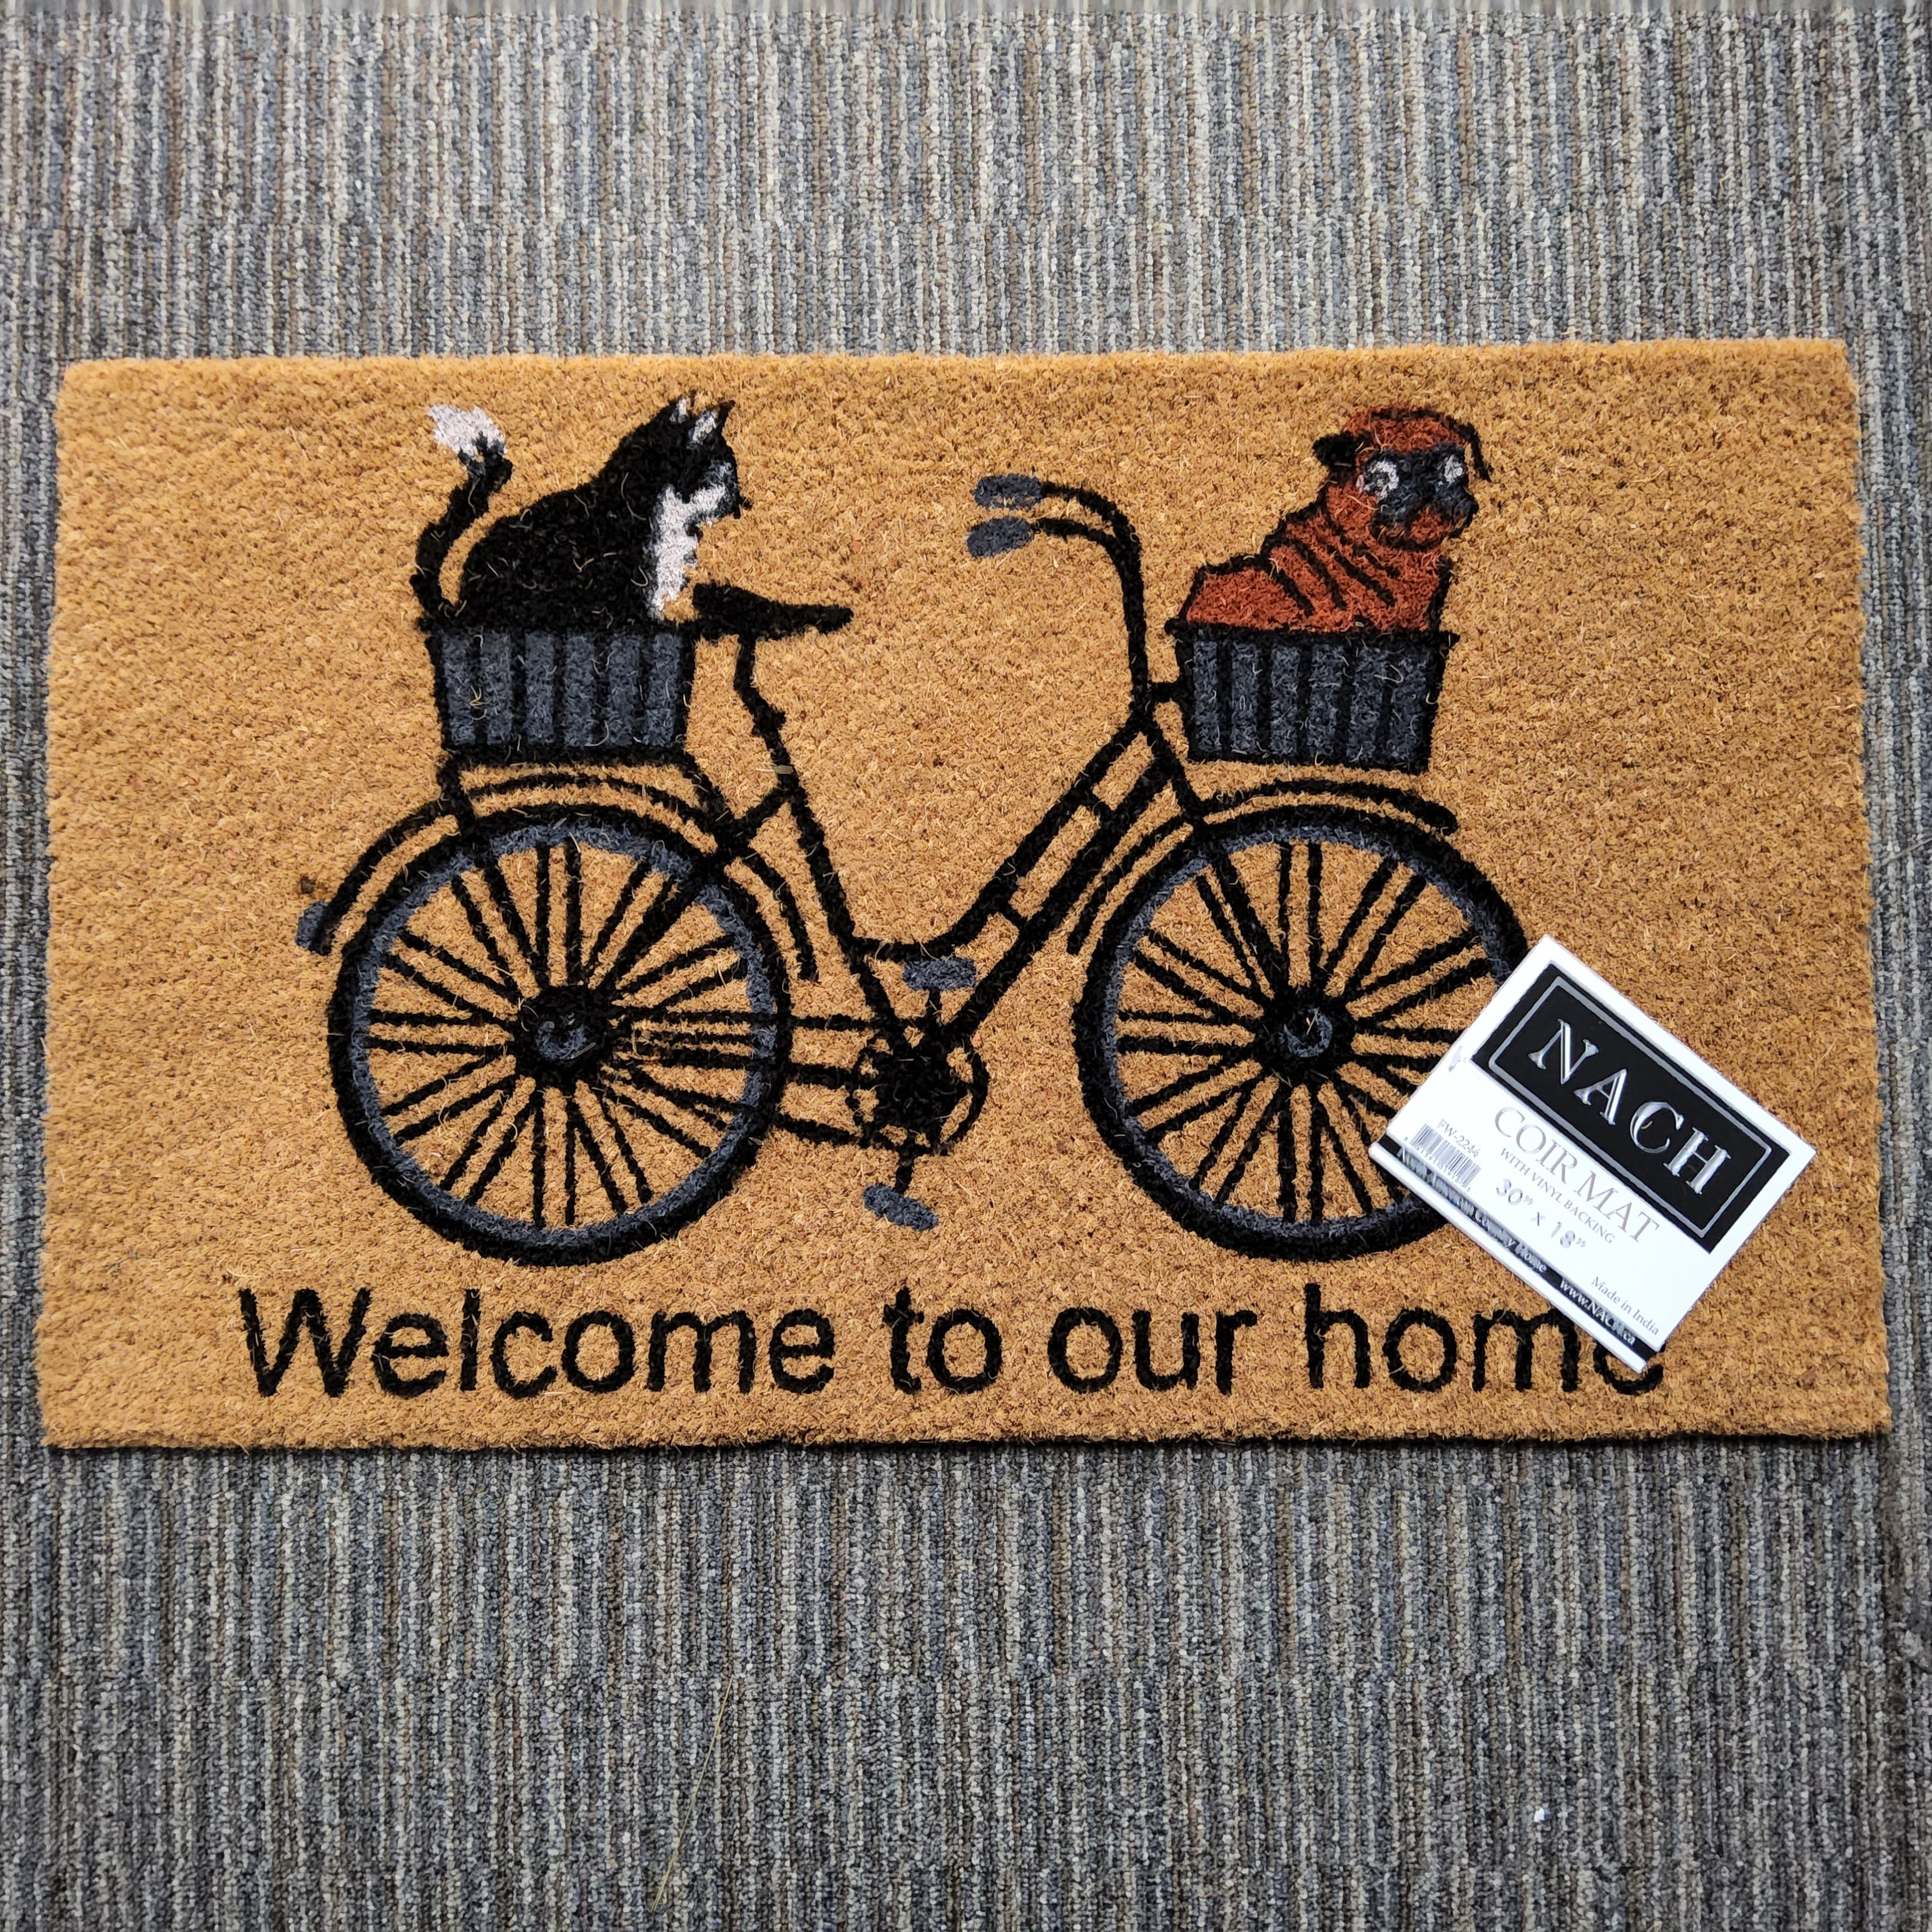 Doormat - "Welcome to our home" - Coir Mat - Bicycle